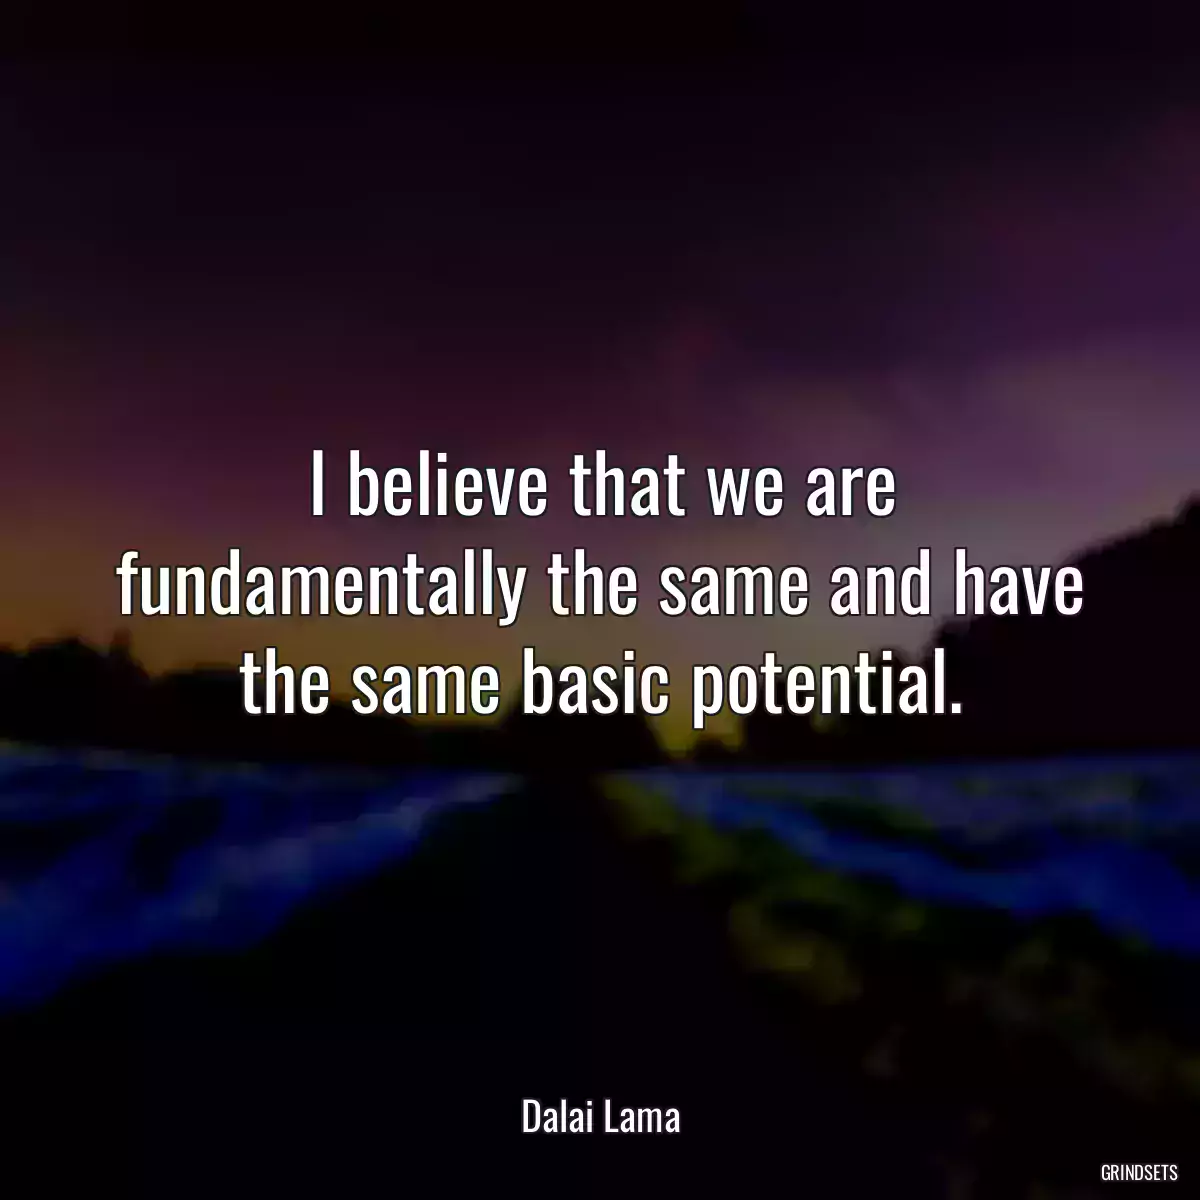 I believe that we are fundamentally the same and have the same basic potential.